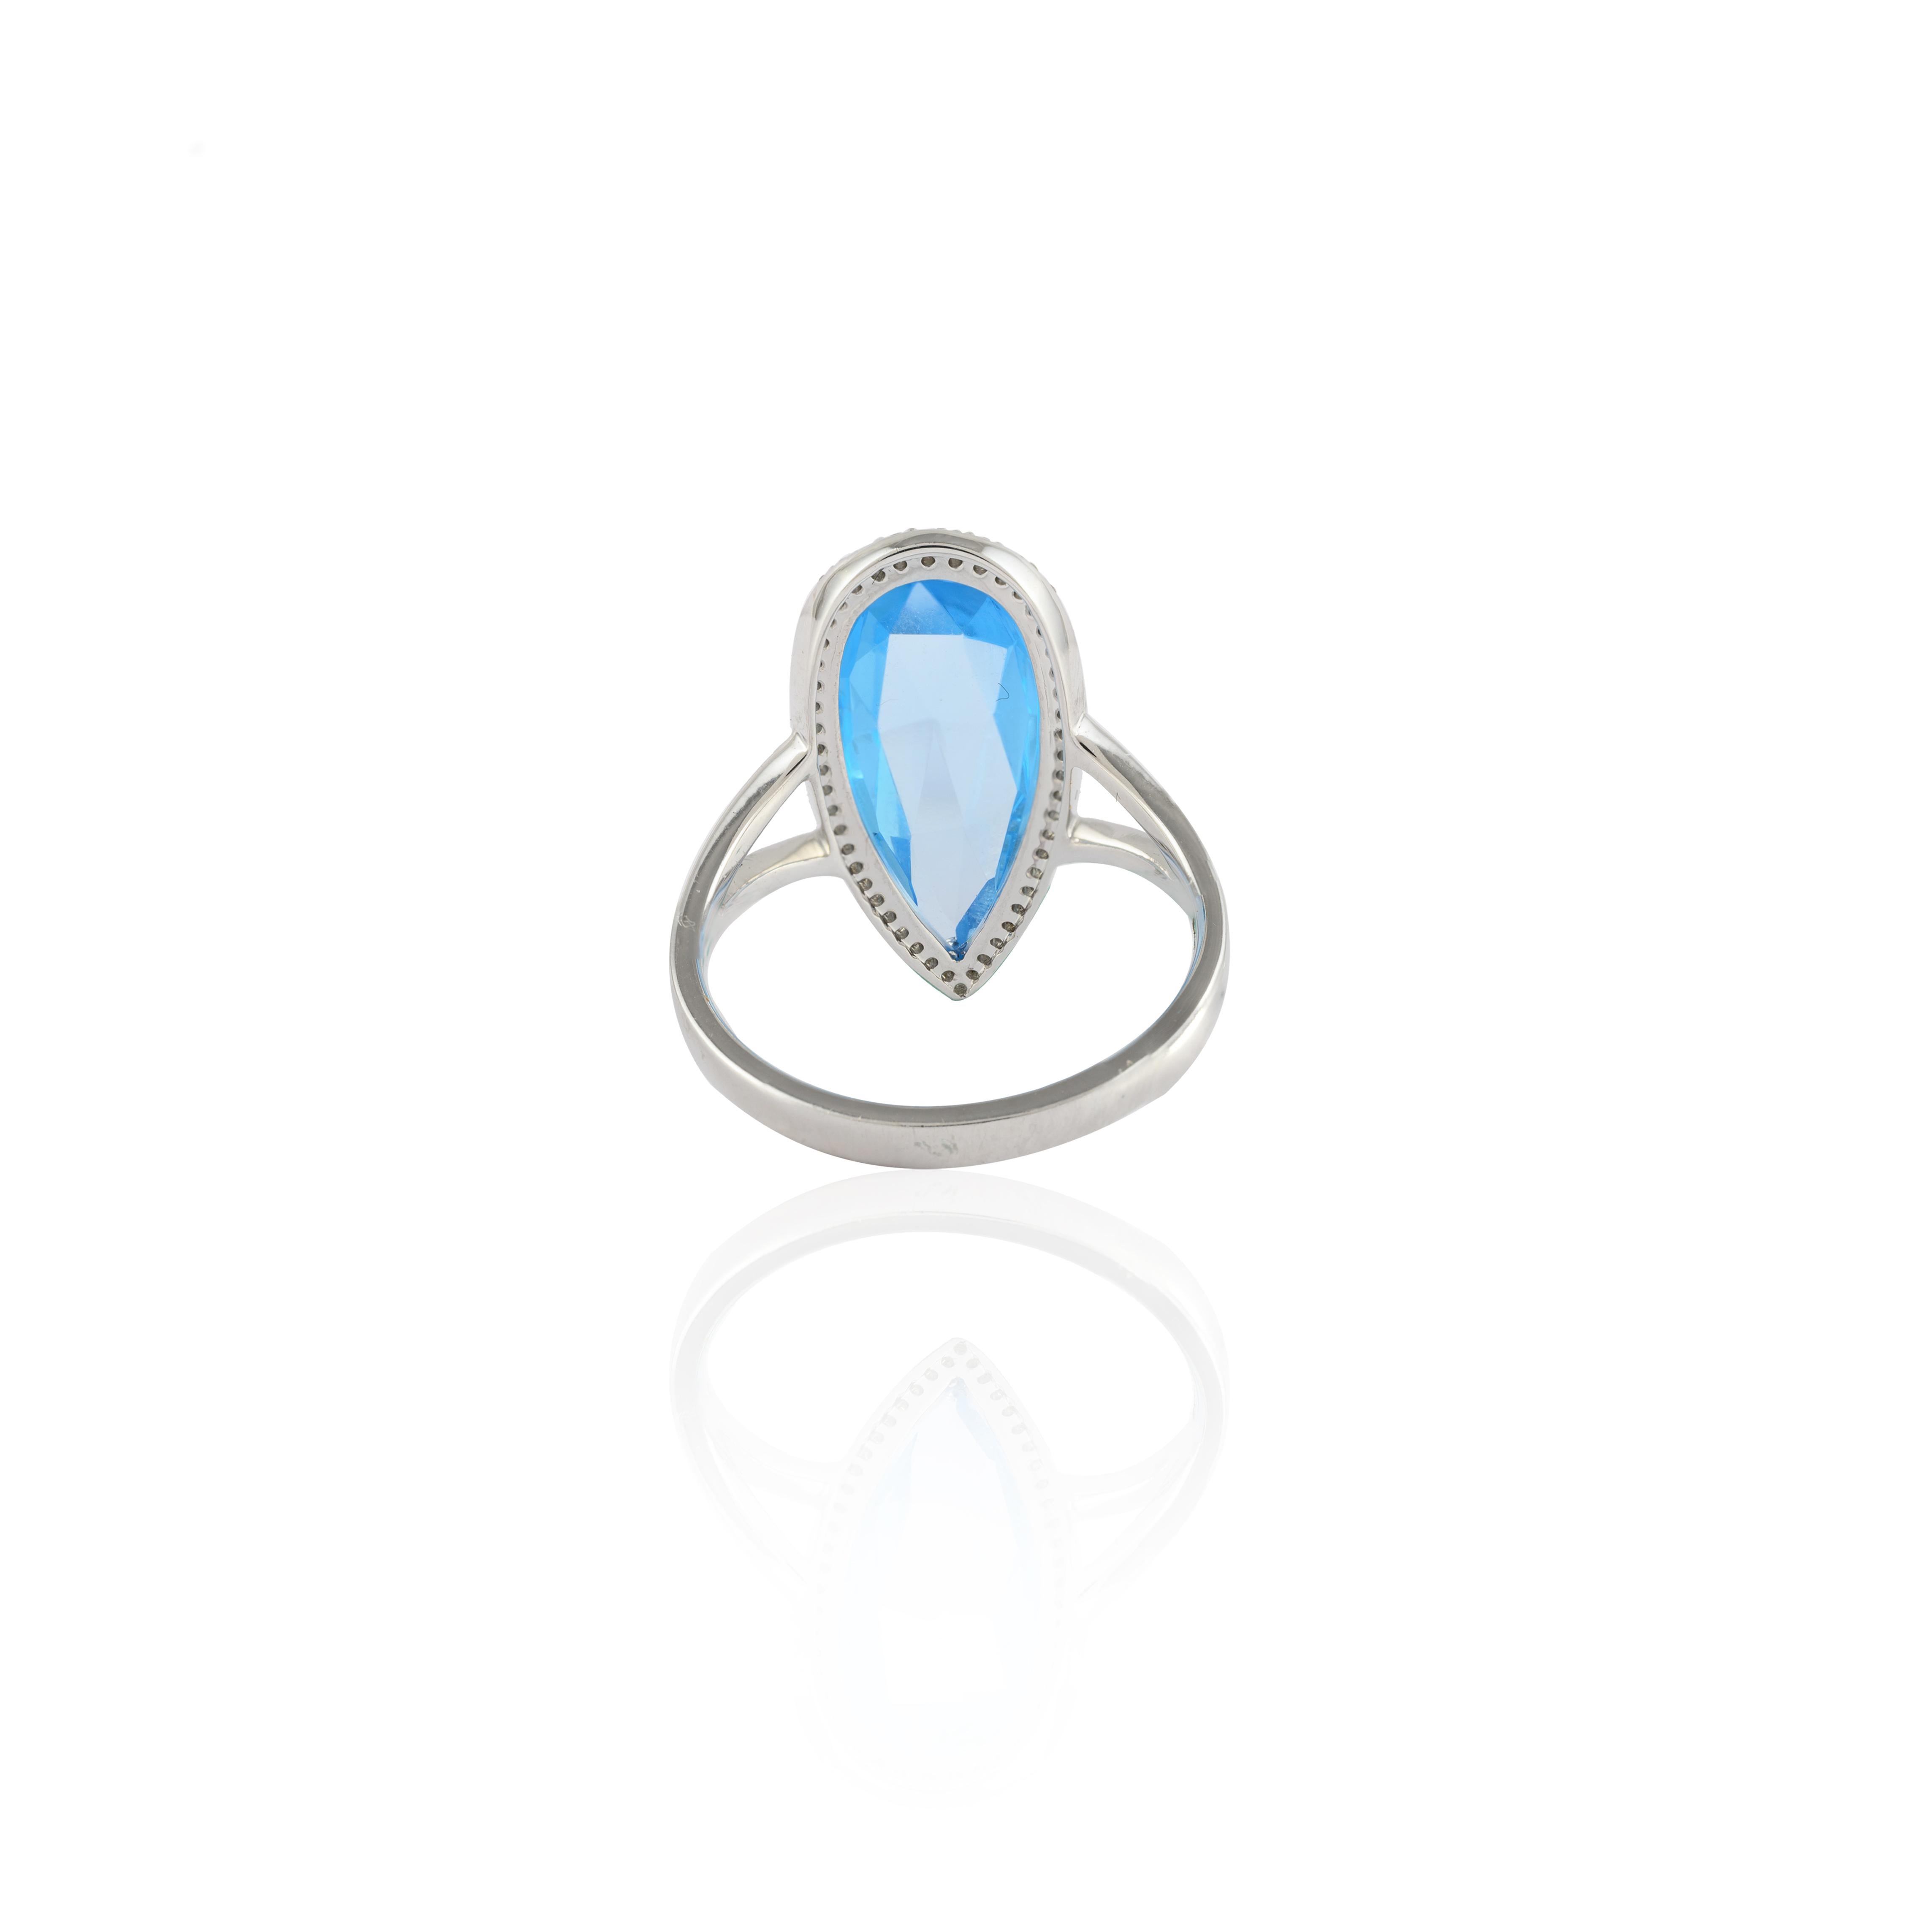 For Sale:  Glitzy 6.82 Carat Pear Blue Topaz Diamond Cocktail Ring in 14k Solid White Gold 7